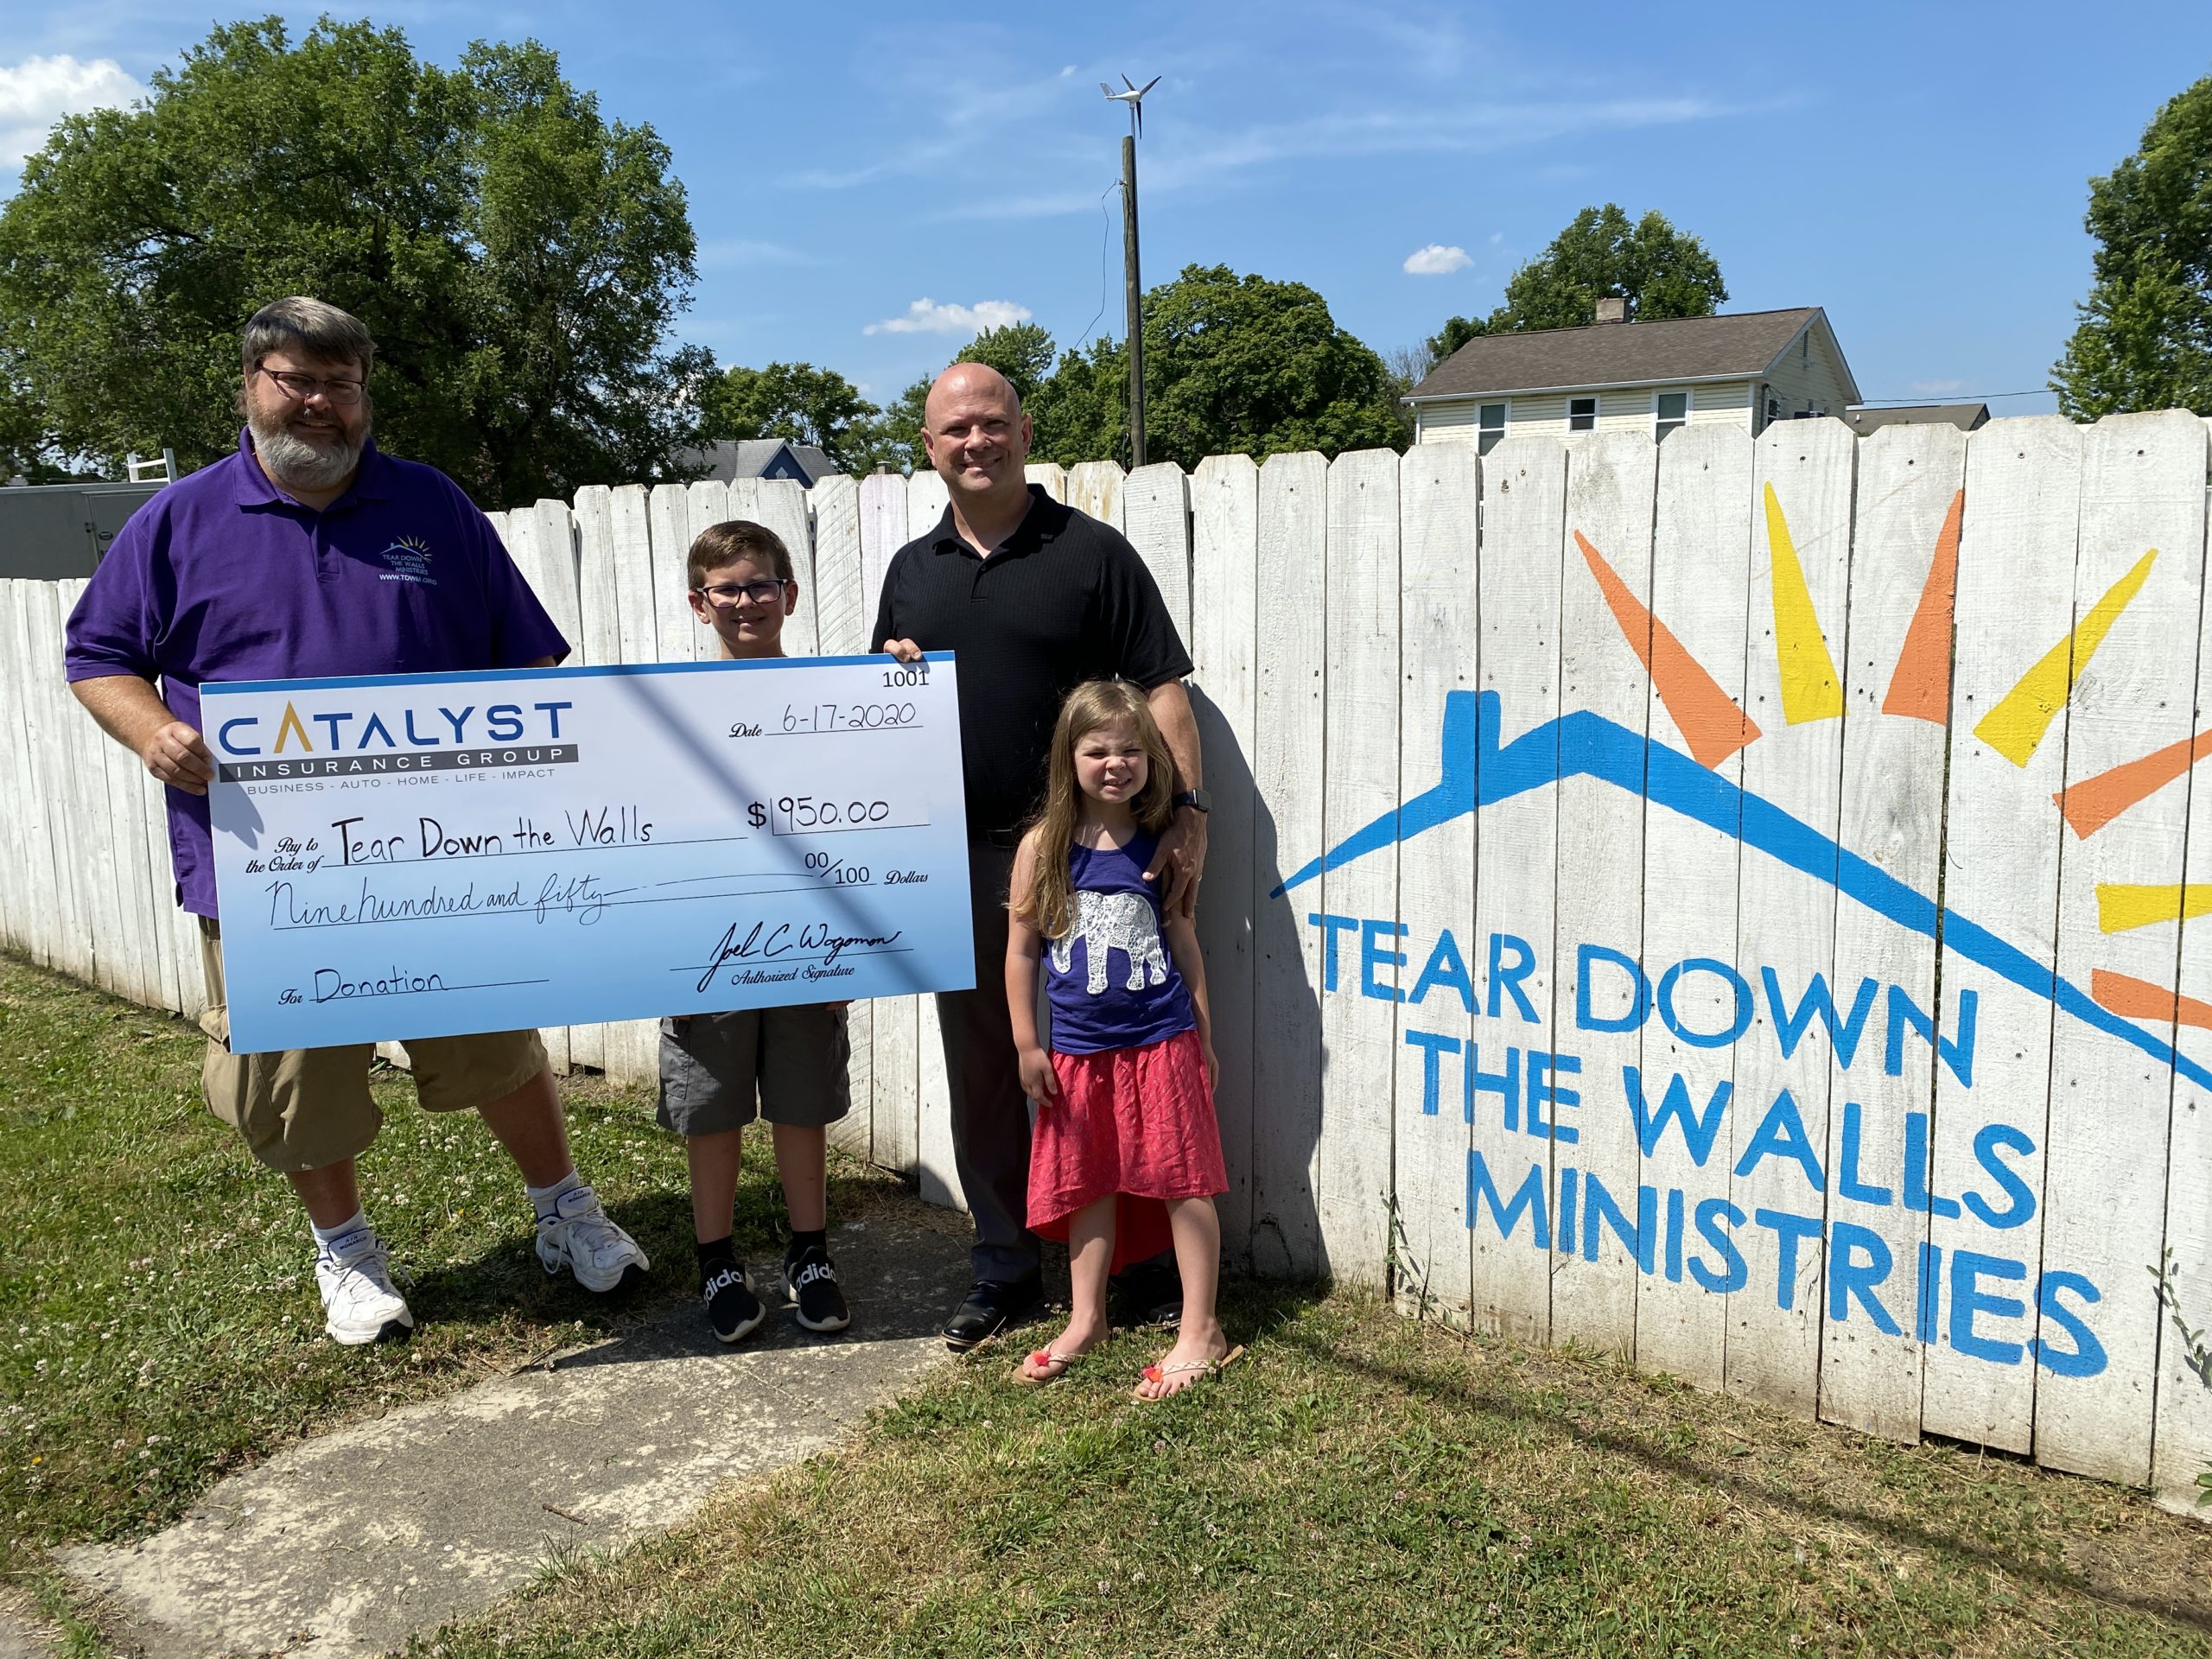 Tear Down The Wall Ministries - Catalyst Insurance Donation